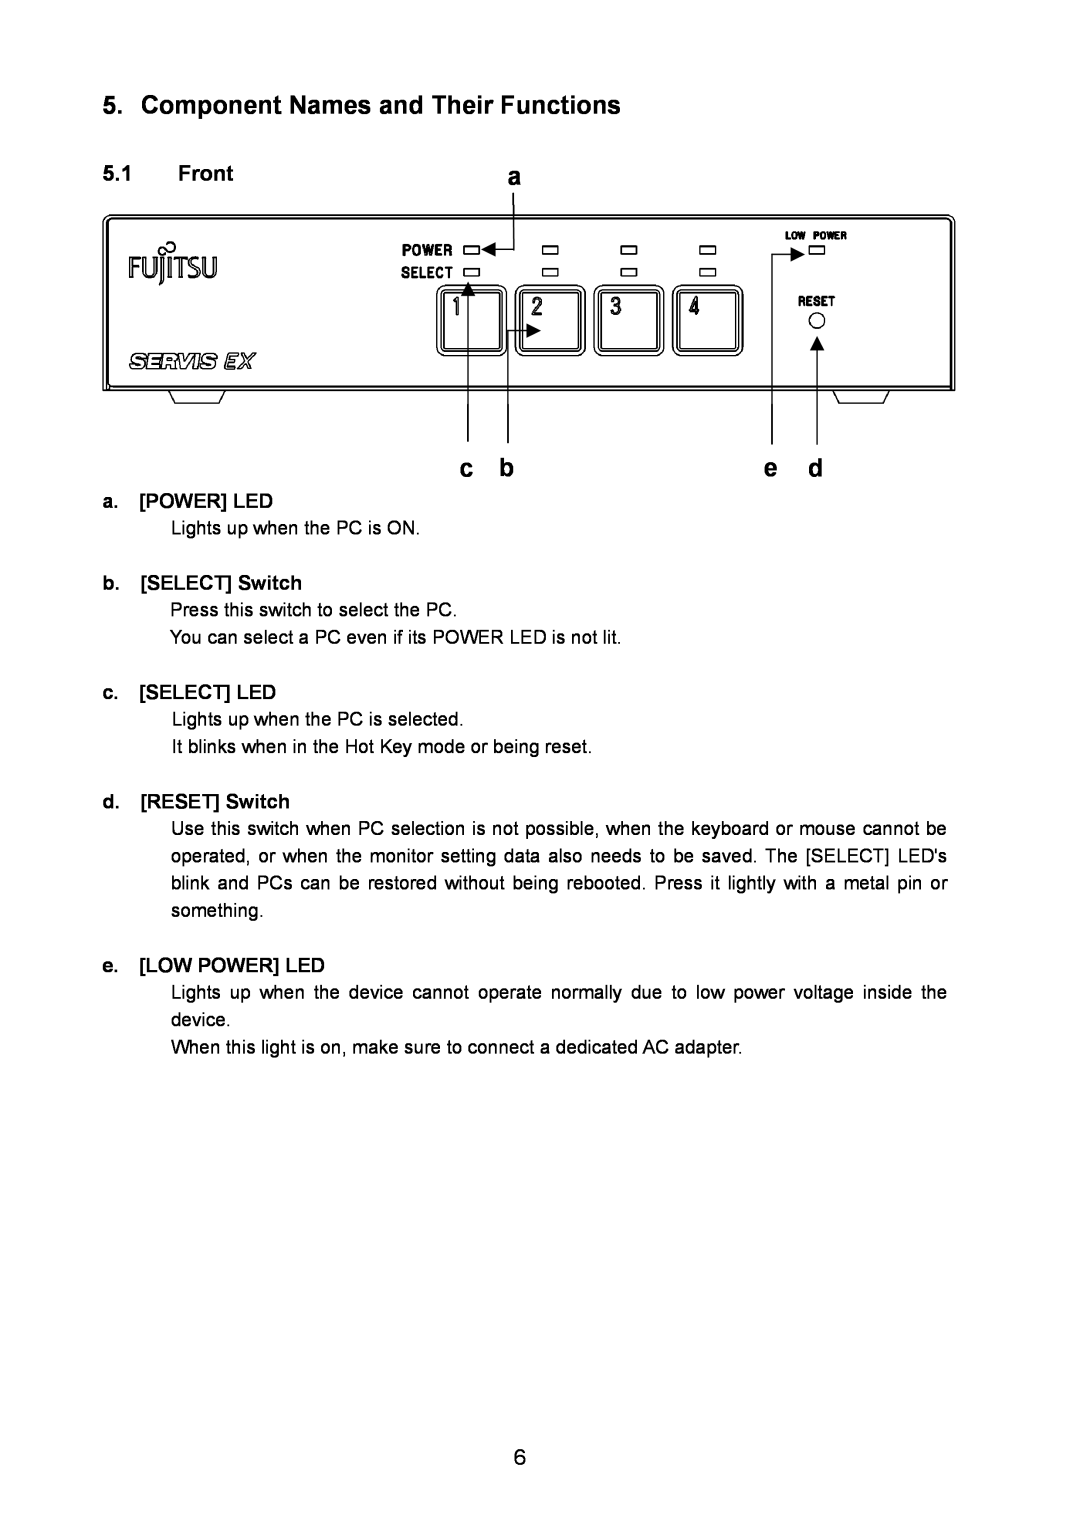 Fujitsu FS-1004EX user manual Component Names and Their Functions, Front, a. POWER LED, b. SELECT Switch, c. SELECT LED 